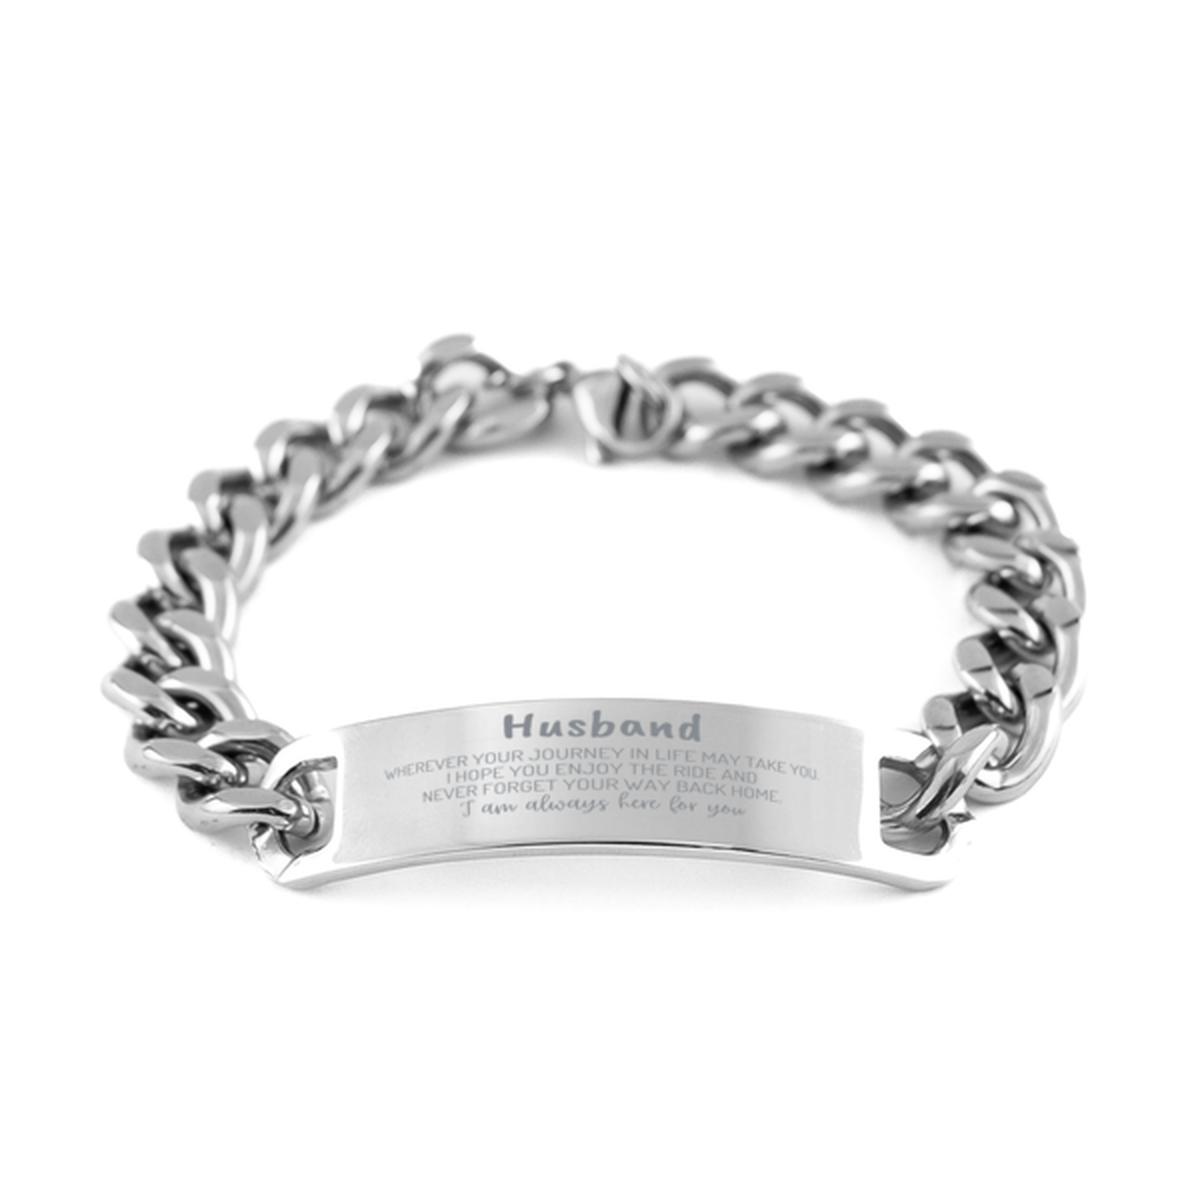 Husband wherever your journey in life may take you, I am always here for you Husband Cuban Chain Stainless Steel Bracelet, Awesome Christmas Gifts For Husband, Husband Birthday Gifts for Men Women Family Loved One